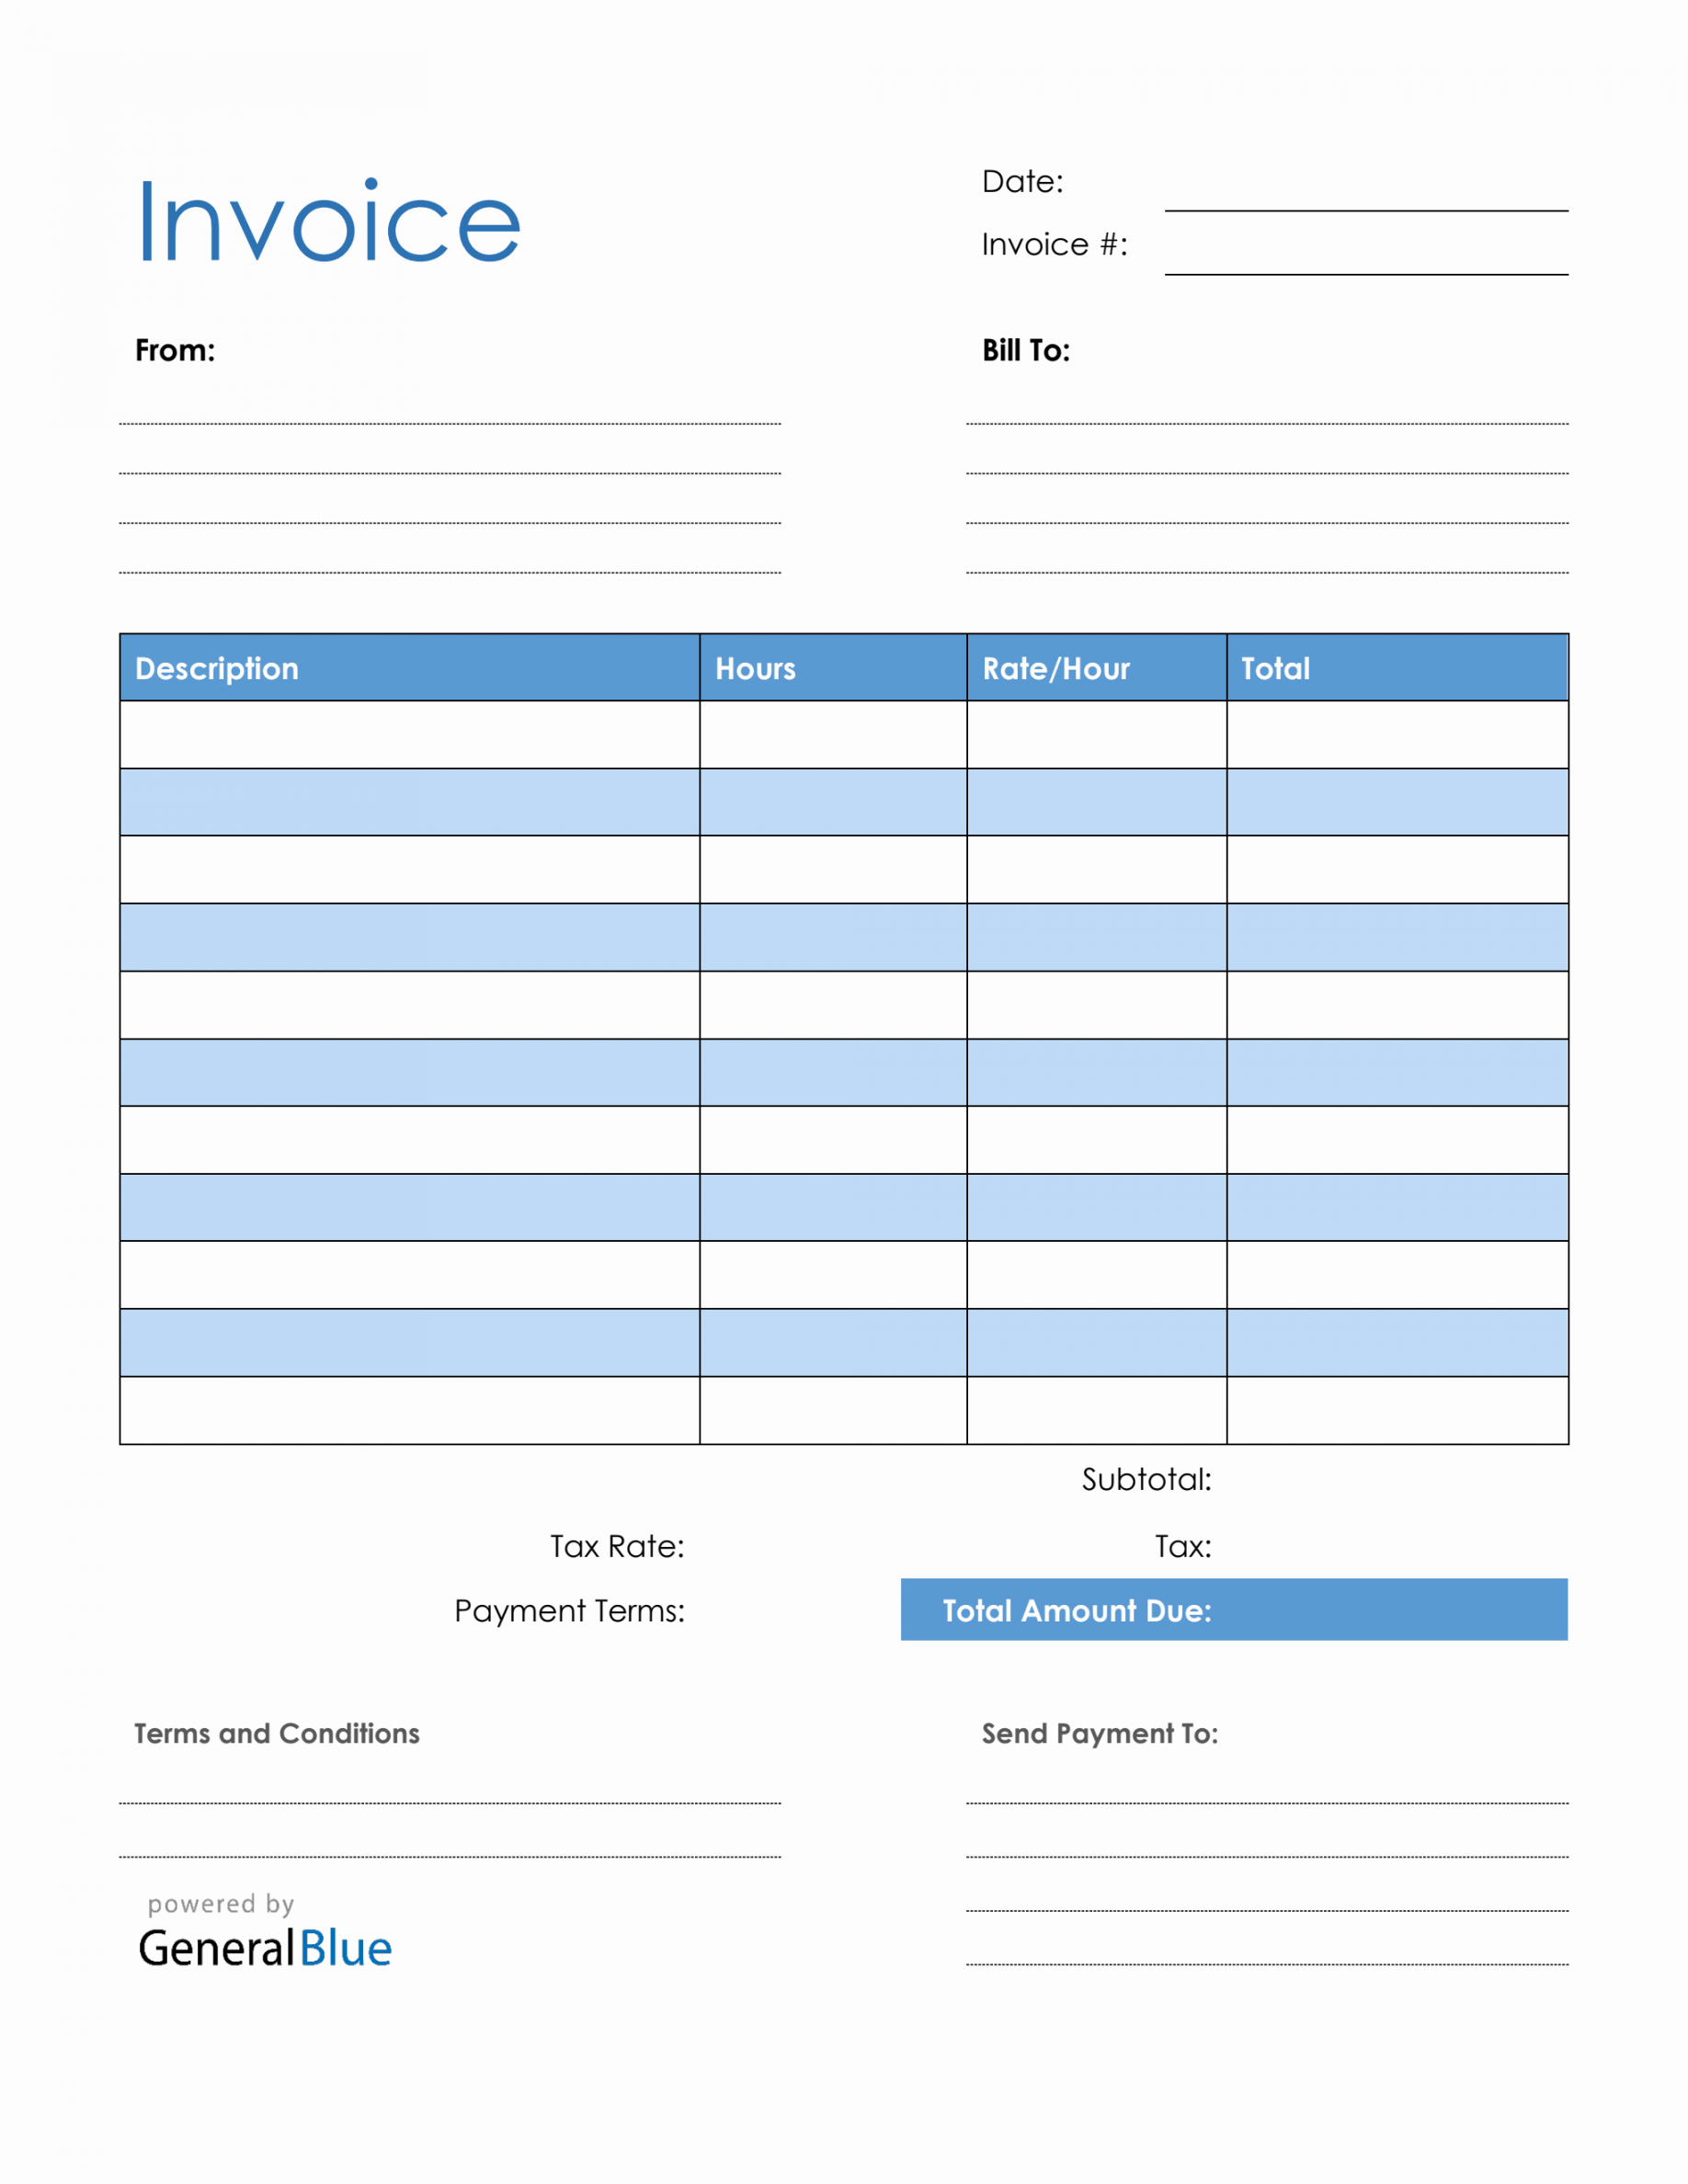 Printable Invoices For Free - Printable - Blank Invoice Template in PDF Blue